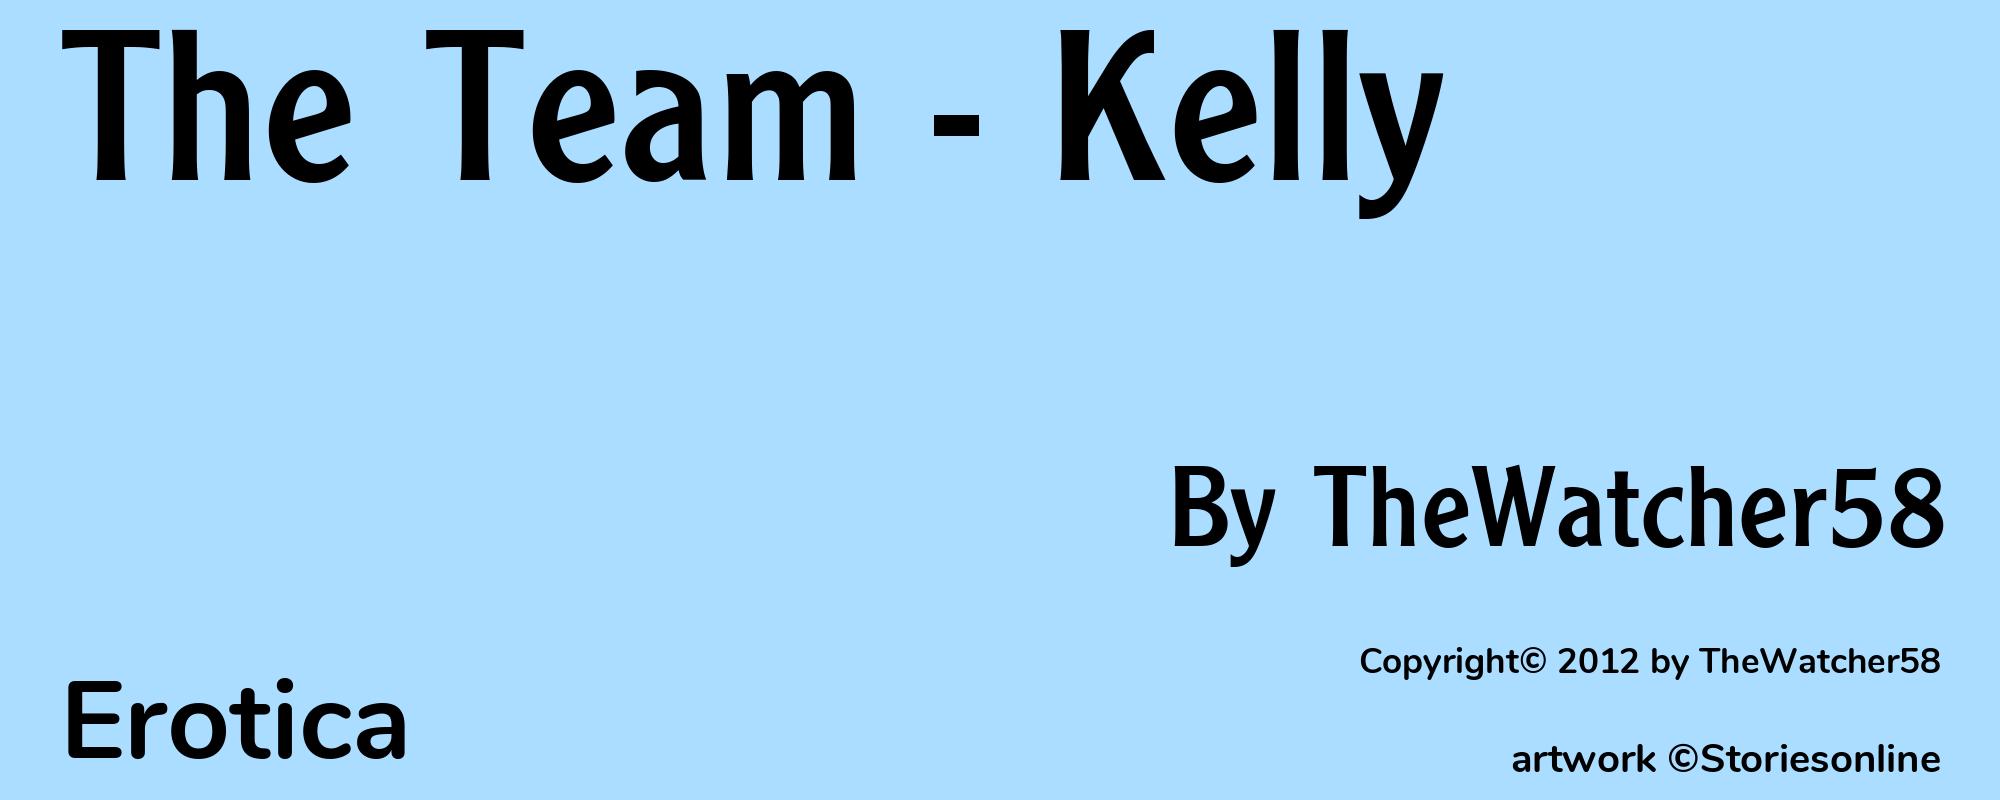 The Team - Kelly - Cover